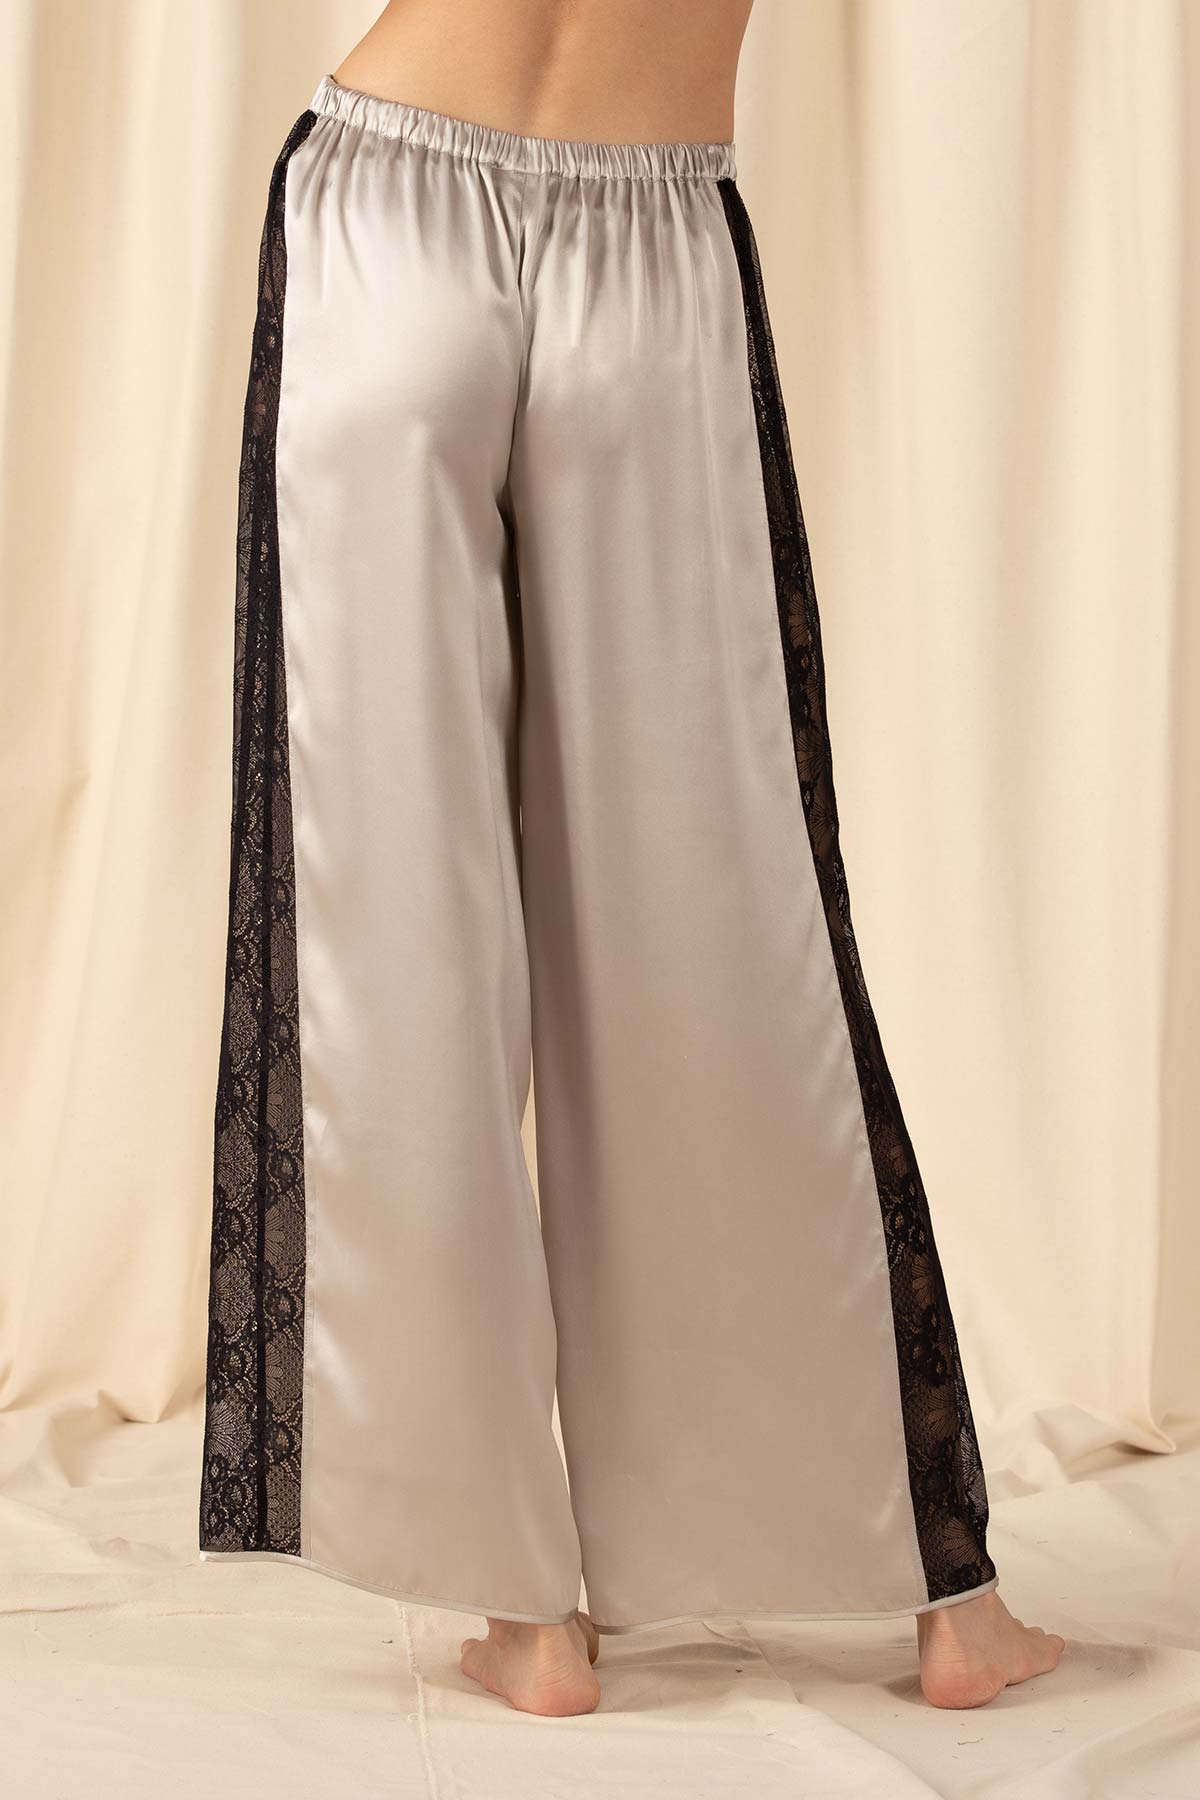 Mischa Silk & Lace Ladies Trousers